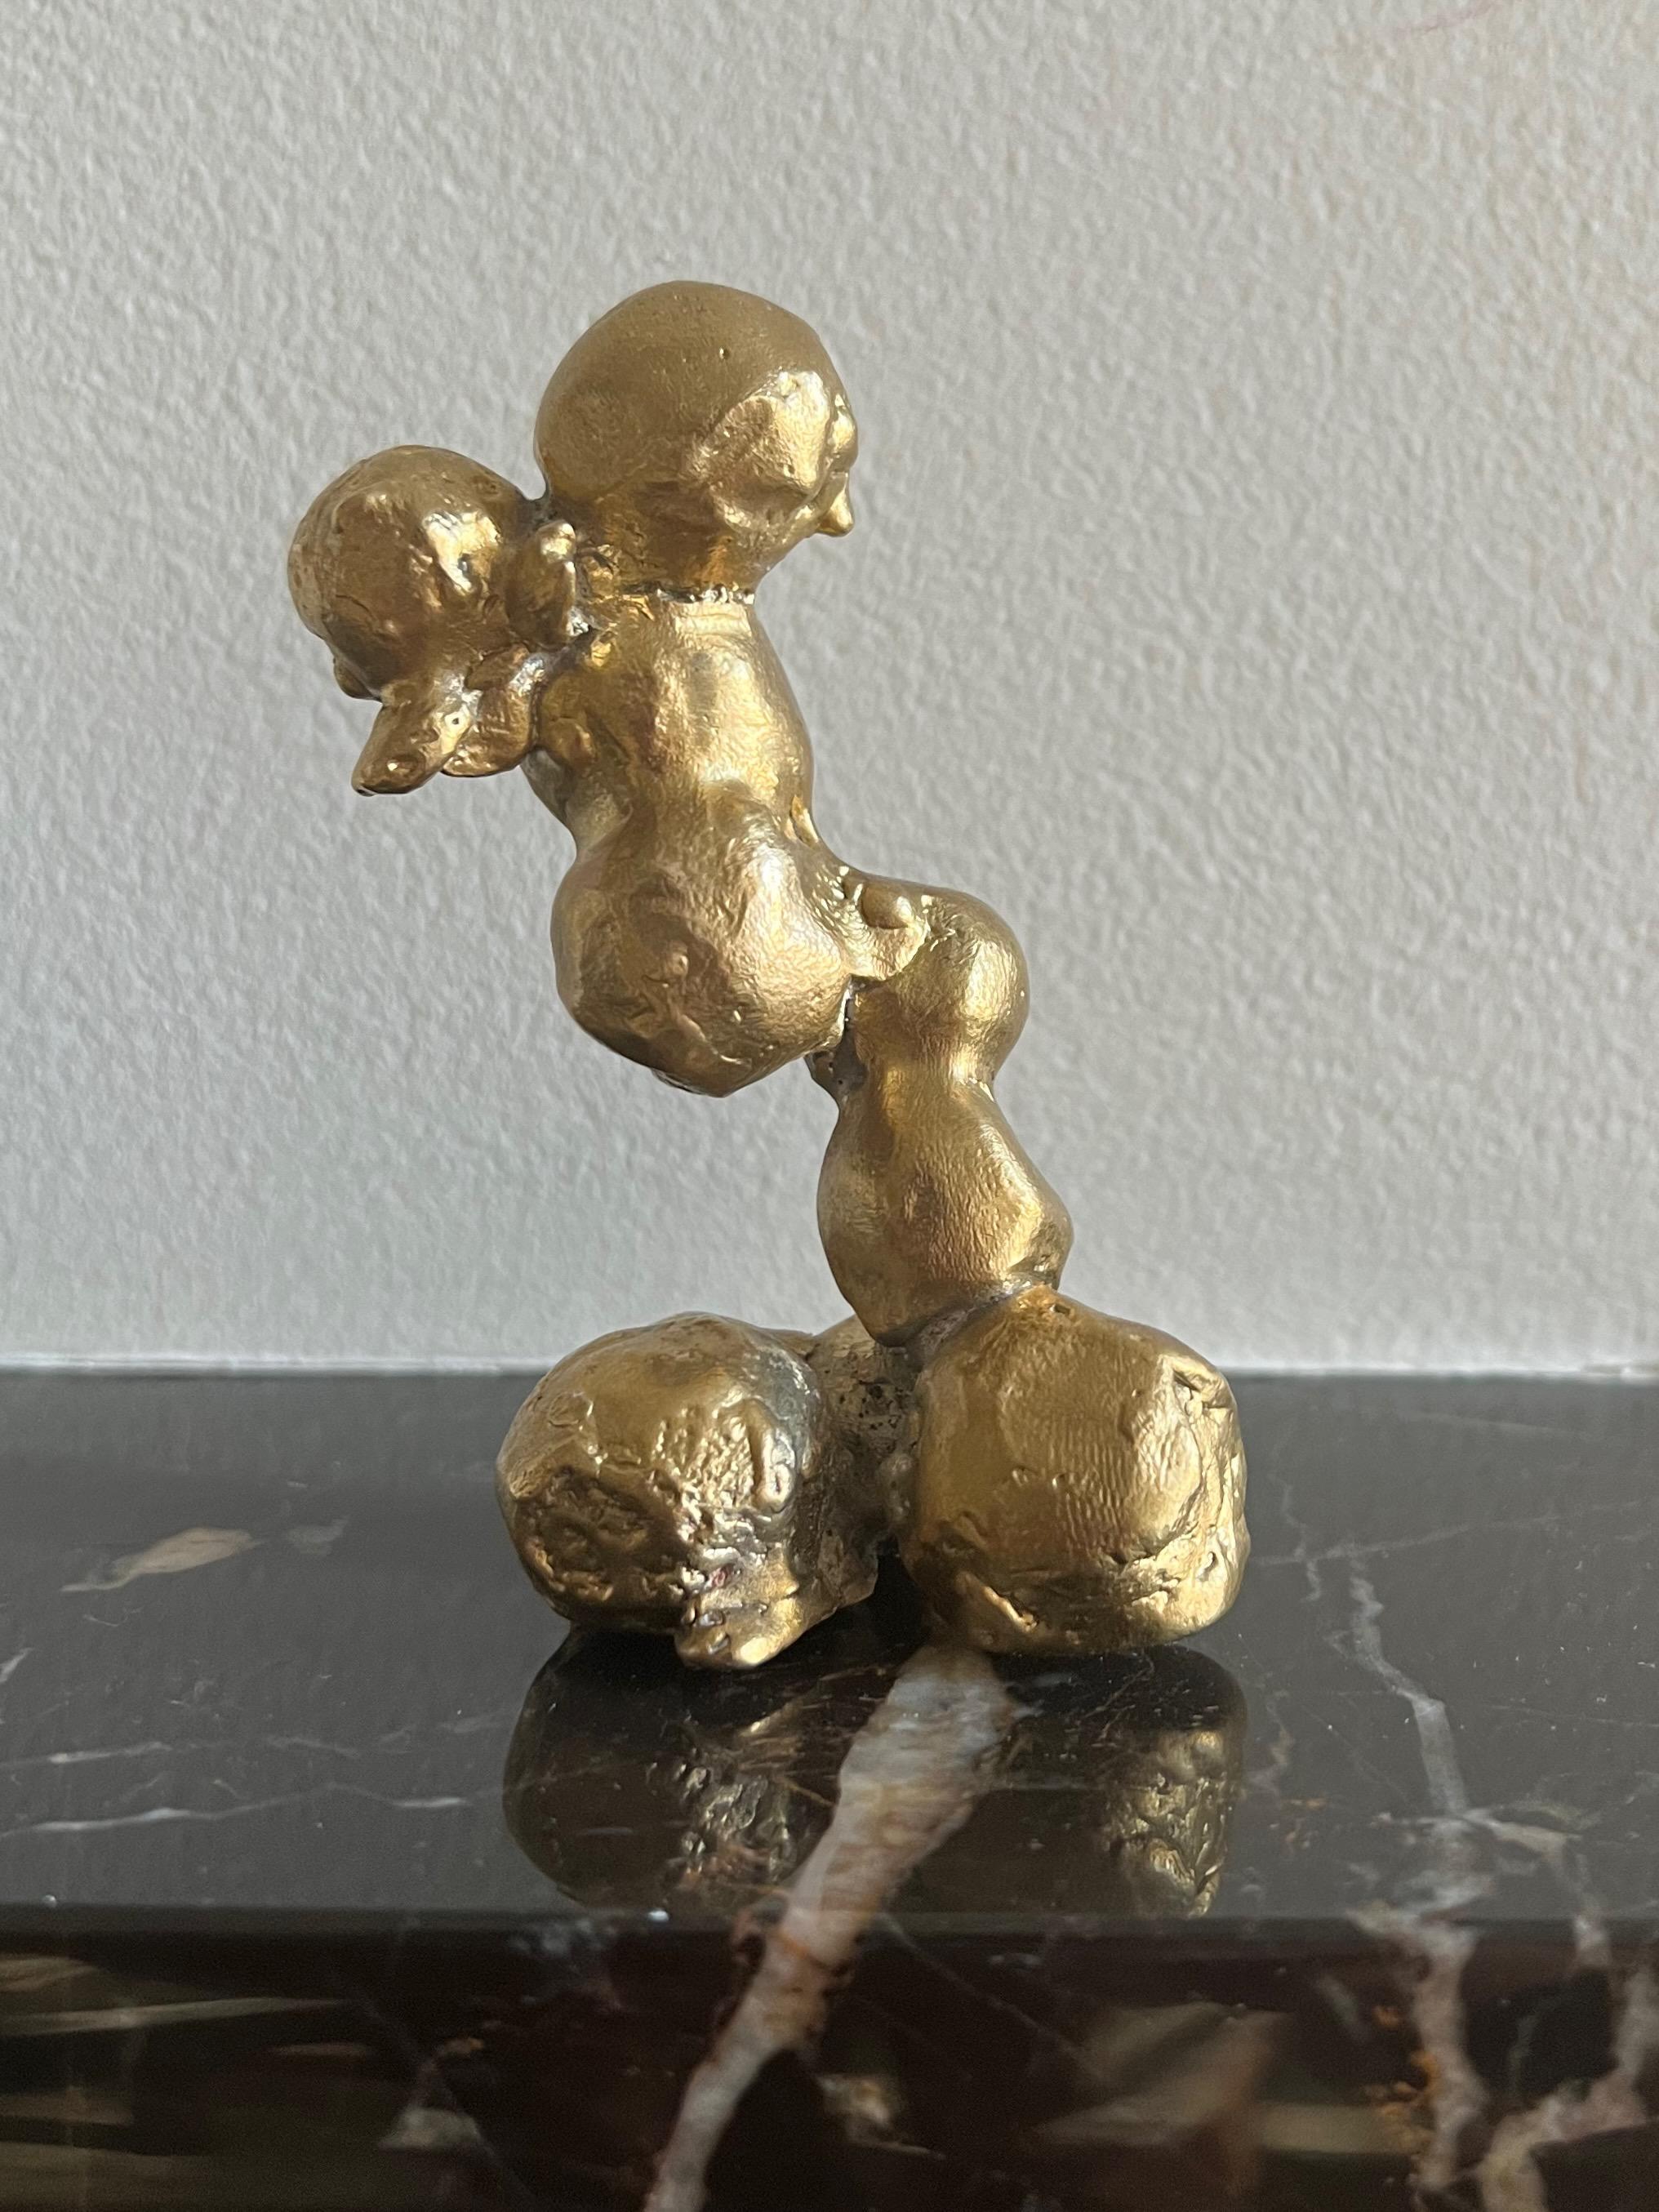 WCS2202 by William Stuart, founder of Costantini Design, is a limited edition of 8 cast bronze sculptures.

Originally molded in wax and peanuts, this is the first of several small 